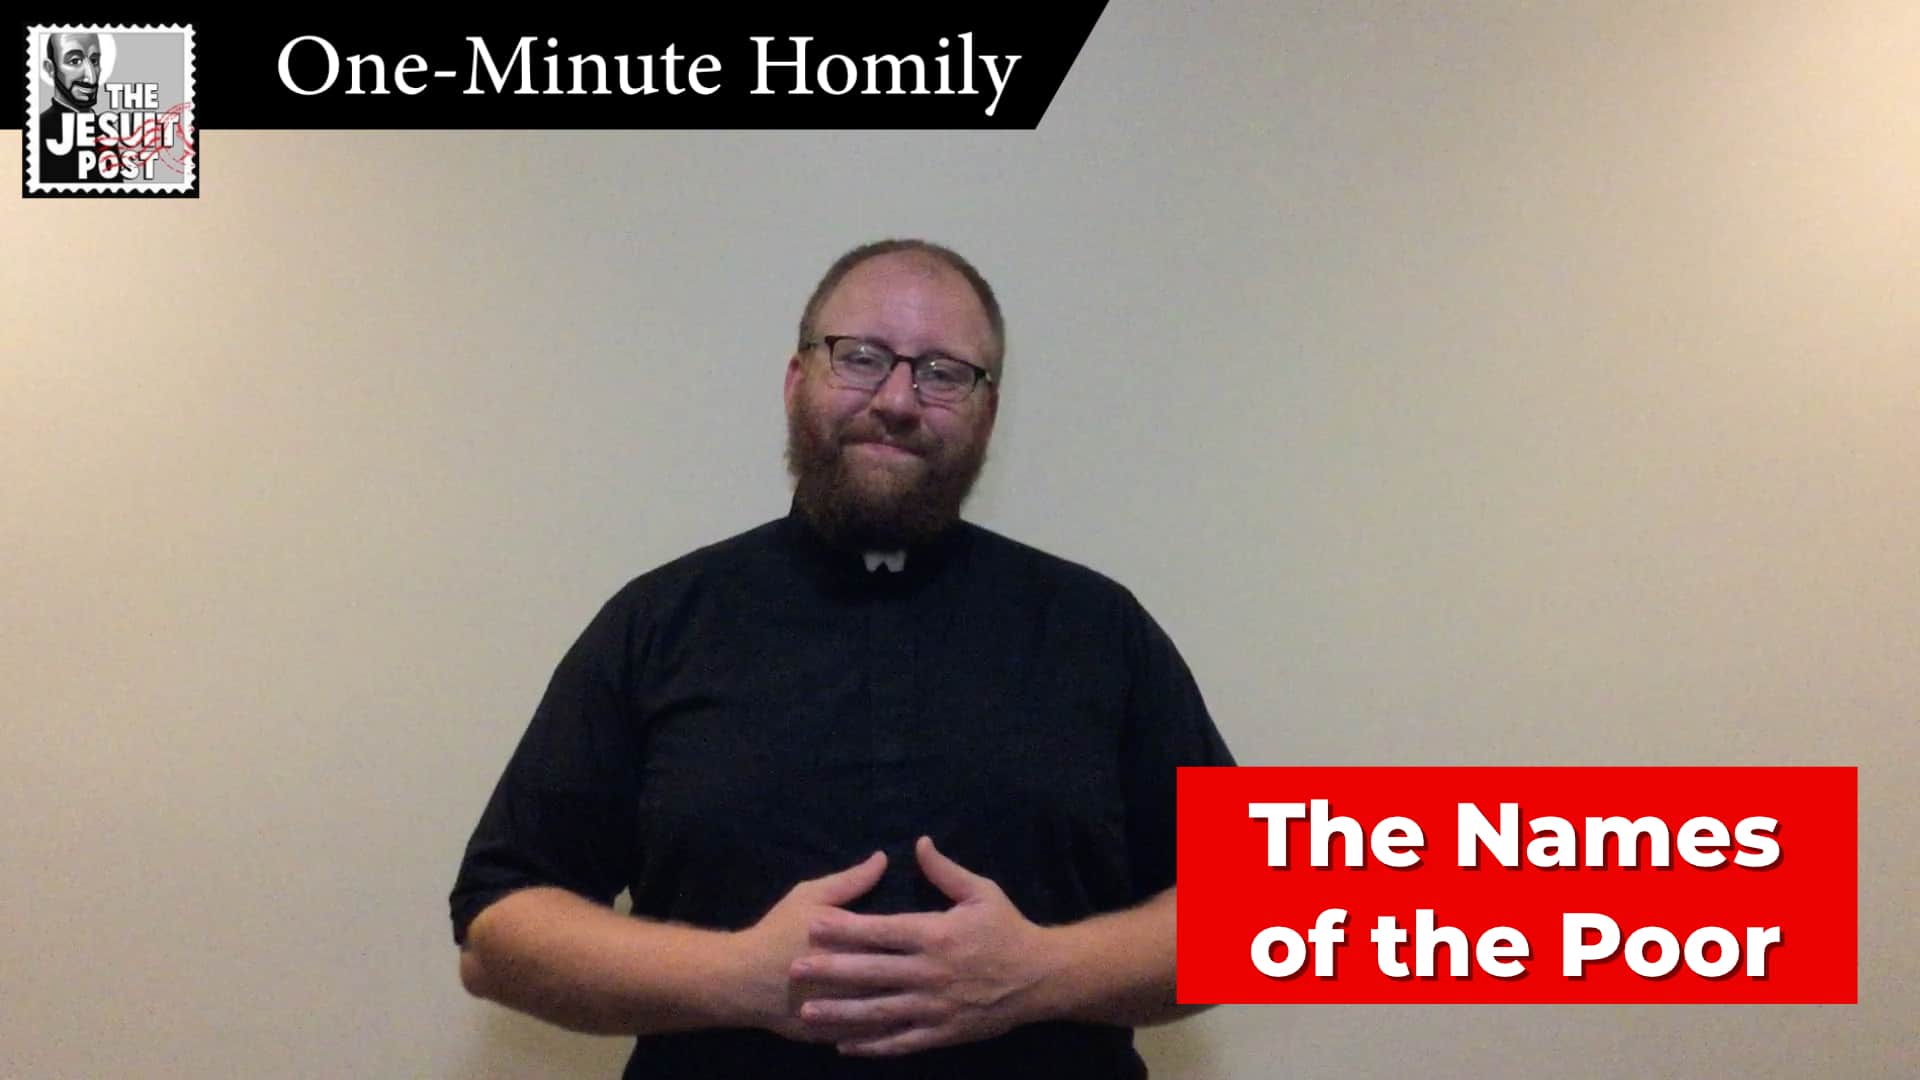 One-Minute Homily: “The Names of the Poor”